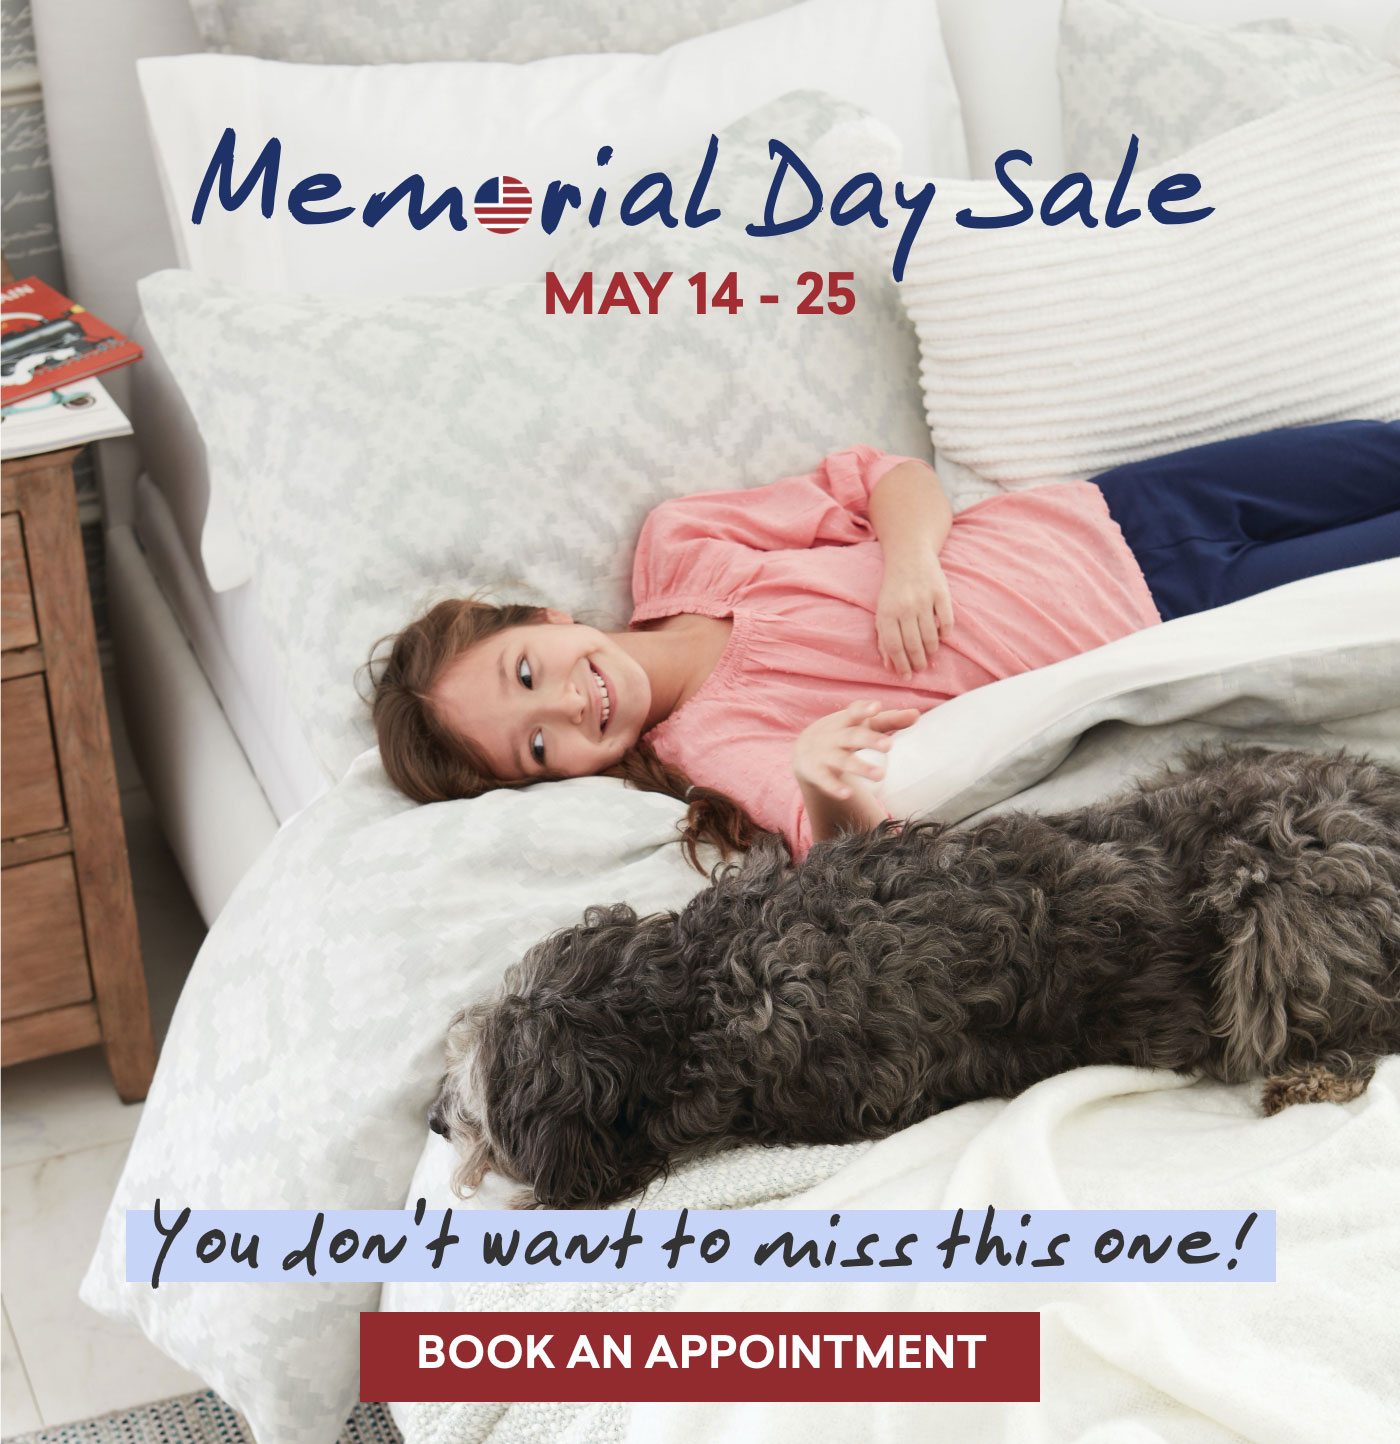 Memorial Day Sale. May 14-25. Book an appointment.